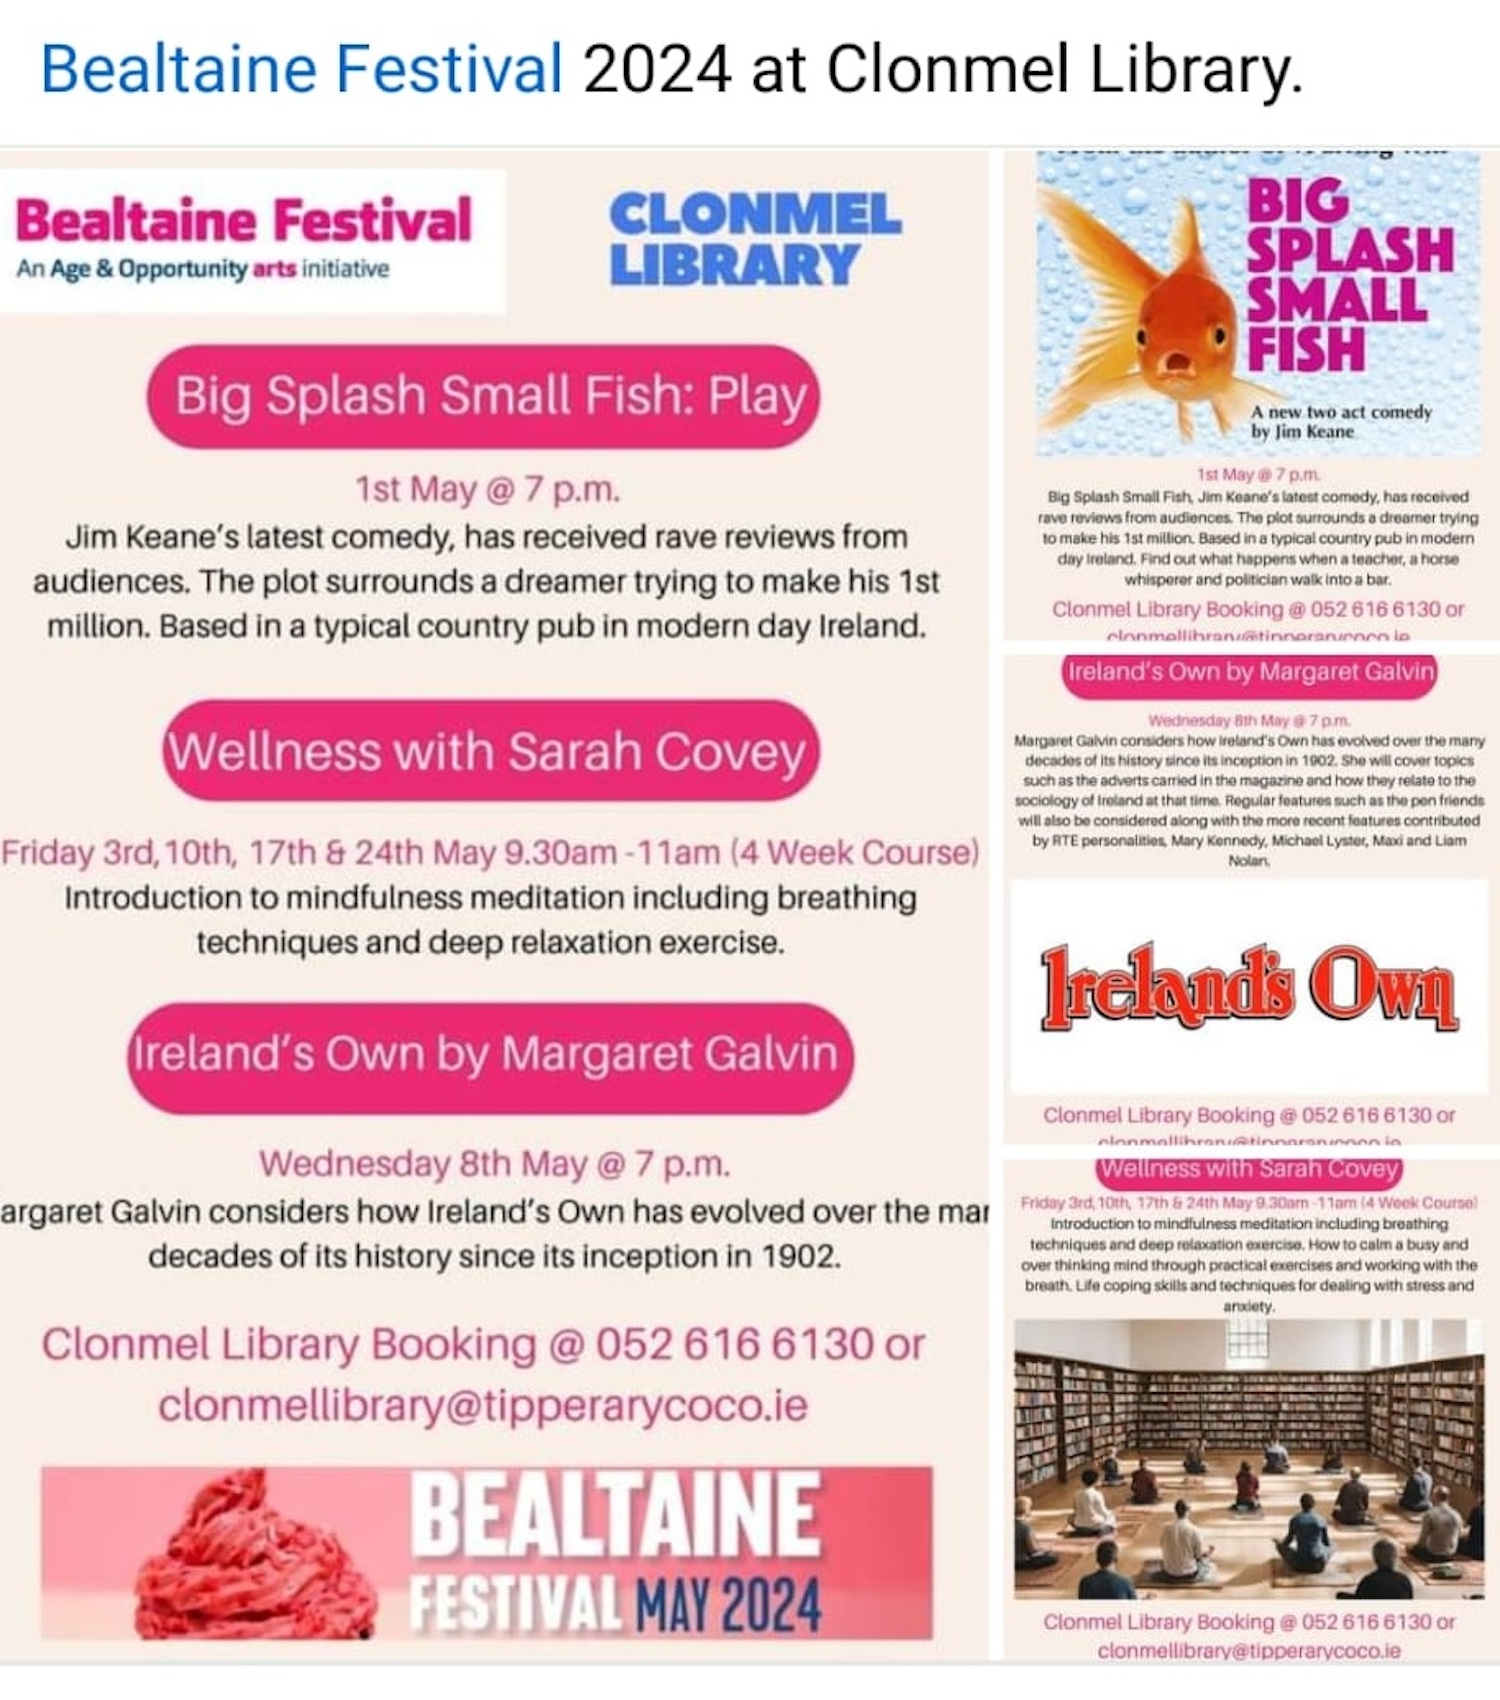 Bealtaine at Clonmel Library